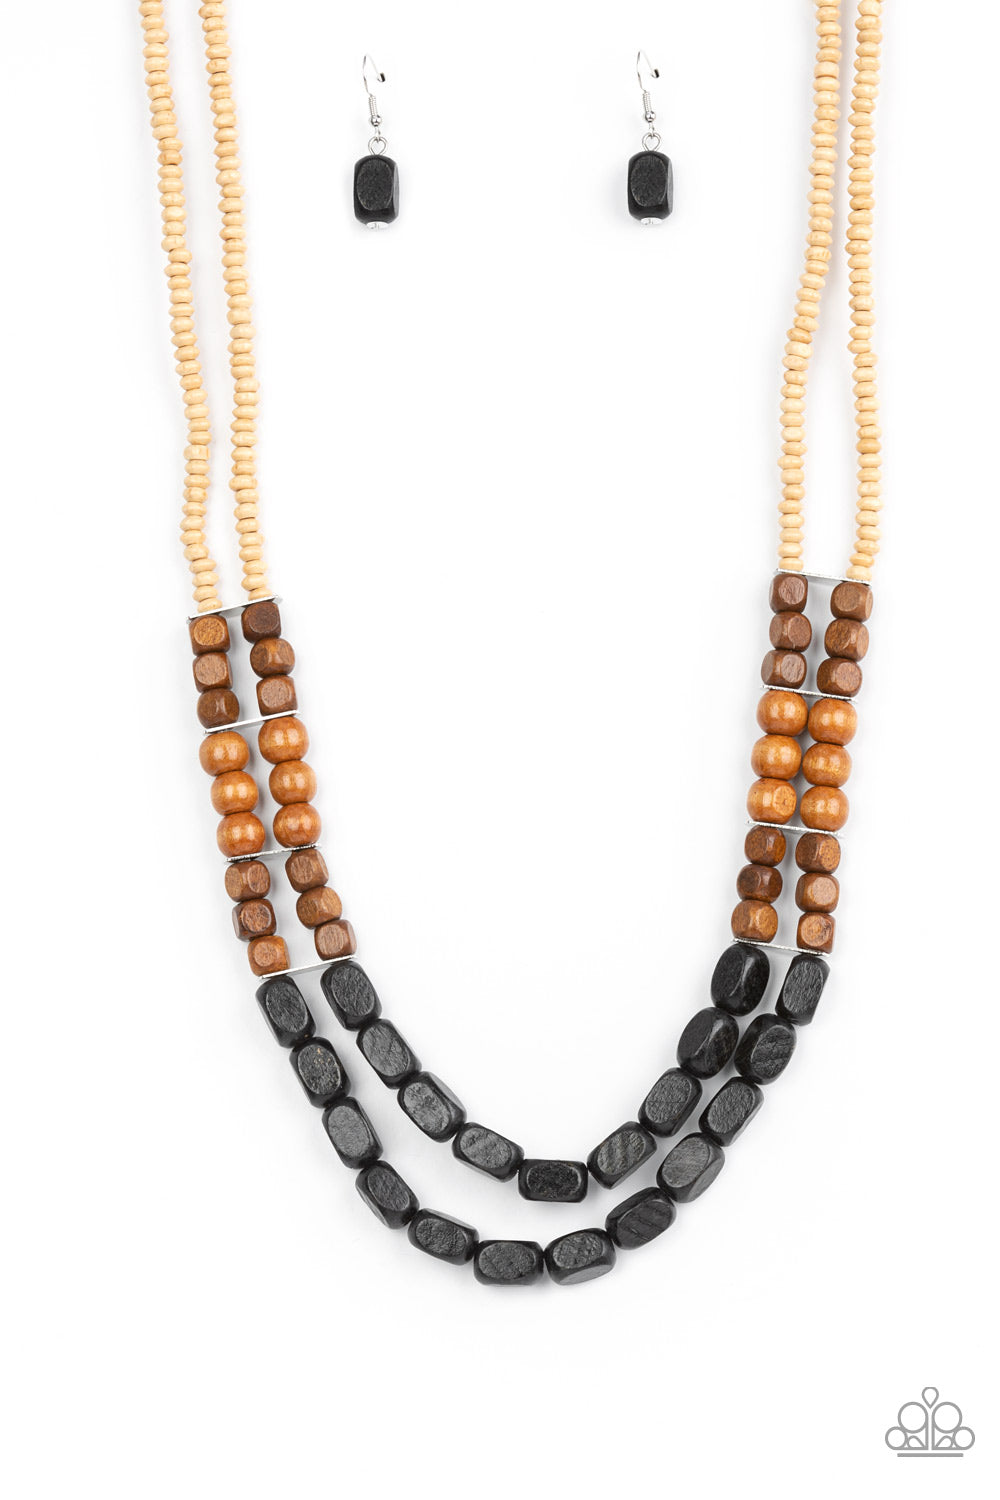 Bermuda Bellhop Black Wooden Necklace - Paparazzi Accessories  Varying in shape, size, and color, an earthy collection of white, brown, and black wooden beads are threaded along invisible wires across the chest, creating tropical inspired layers. Features an adjustable clasp closure.  Sold as one individual necklace. Includes one pair of matching earrings.